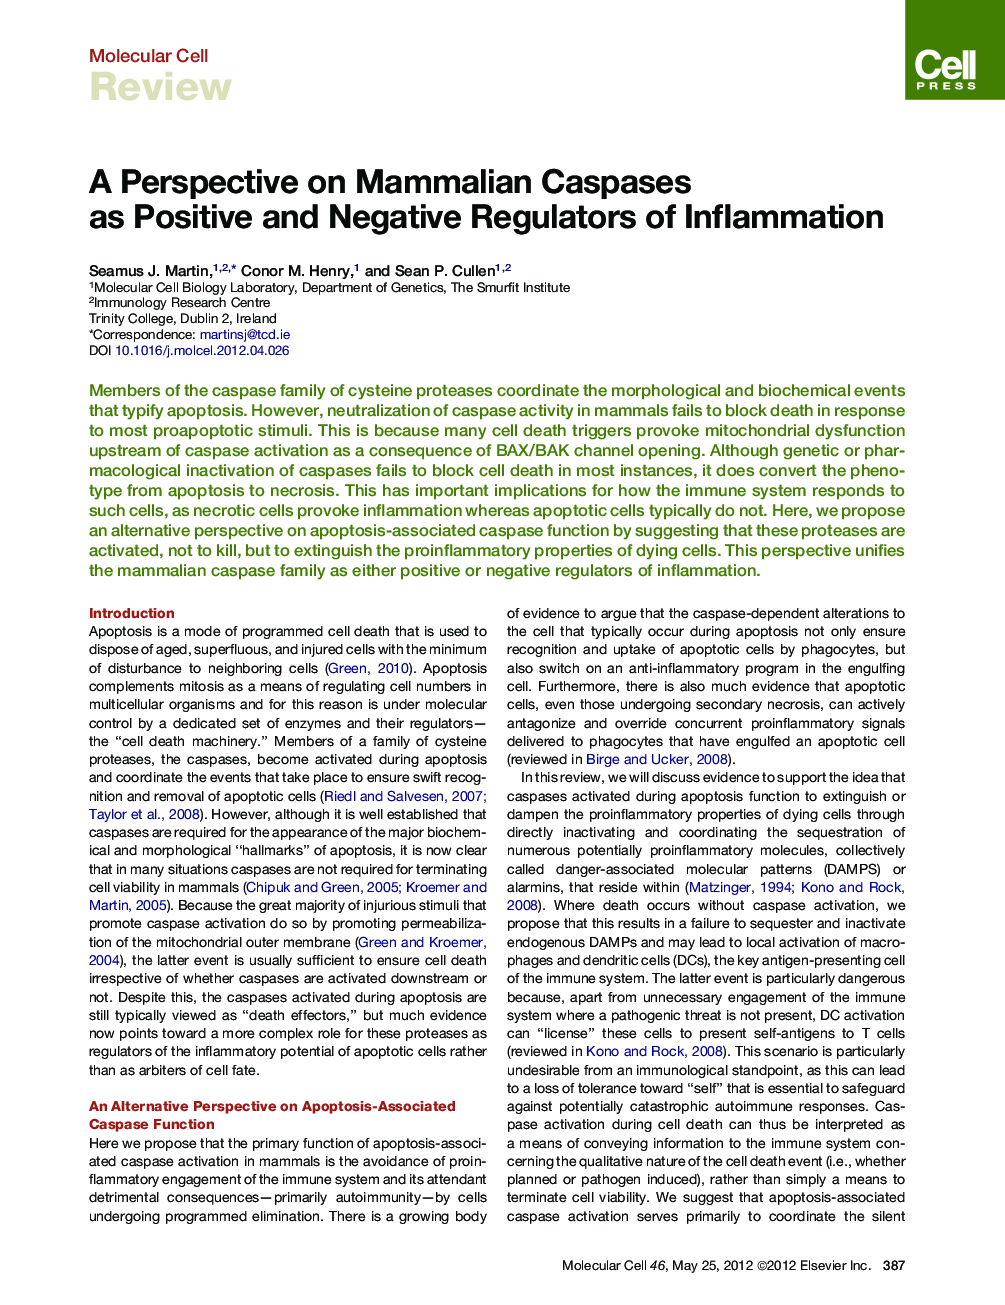 A Perspective on Mammalian Caspases as Positive and Negative Regulators of Inflammation